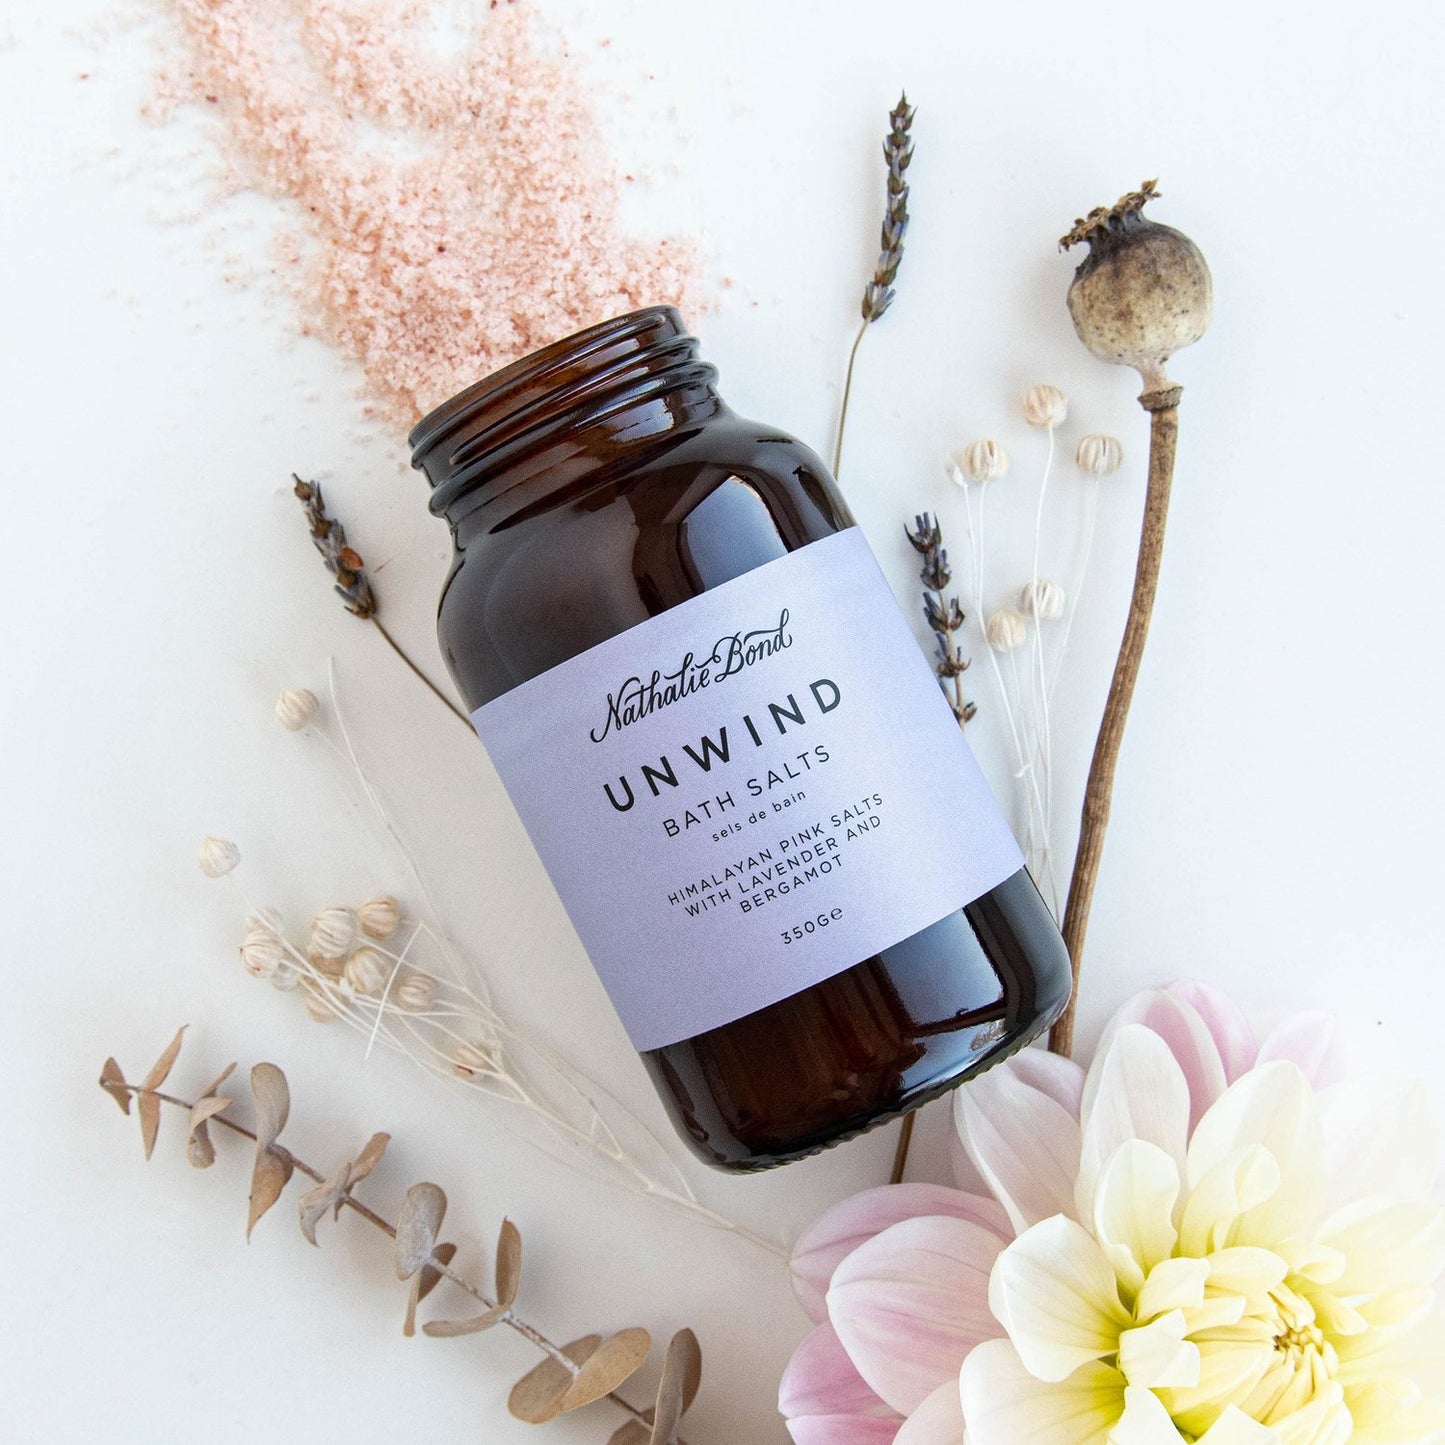 Load image into Gallery viewer, Nathalie Bond Bath Salts Unwind | Relax the senses while detoxifying the body with Nathalie Bond Bath Salts 100% Natural | Vegan | Cruelty Free | Low Waste
